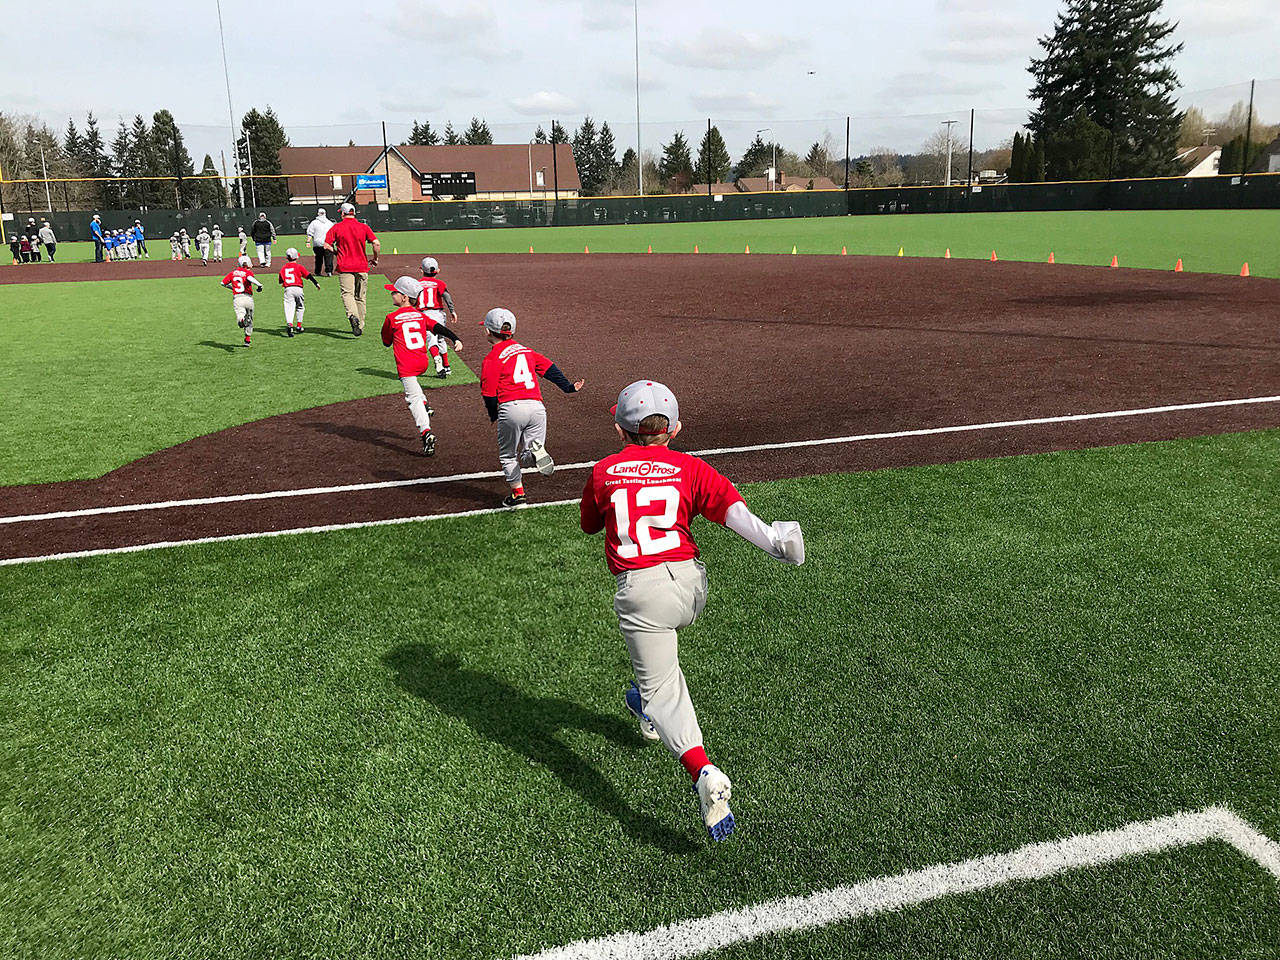 Little Leaguers dart onto the synthetic field at Auburn High School for opening day ceremonies last year. Brannan Park’s main ballfield, an important venue for league games, will get new turf, suitable for year-round play. ROBERT WHALE, Auburn Reporter